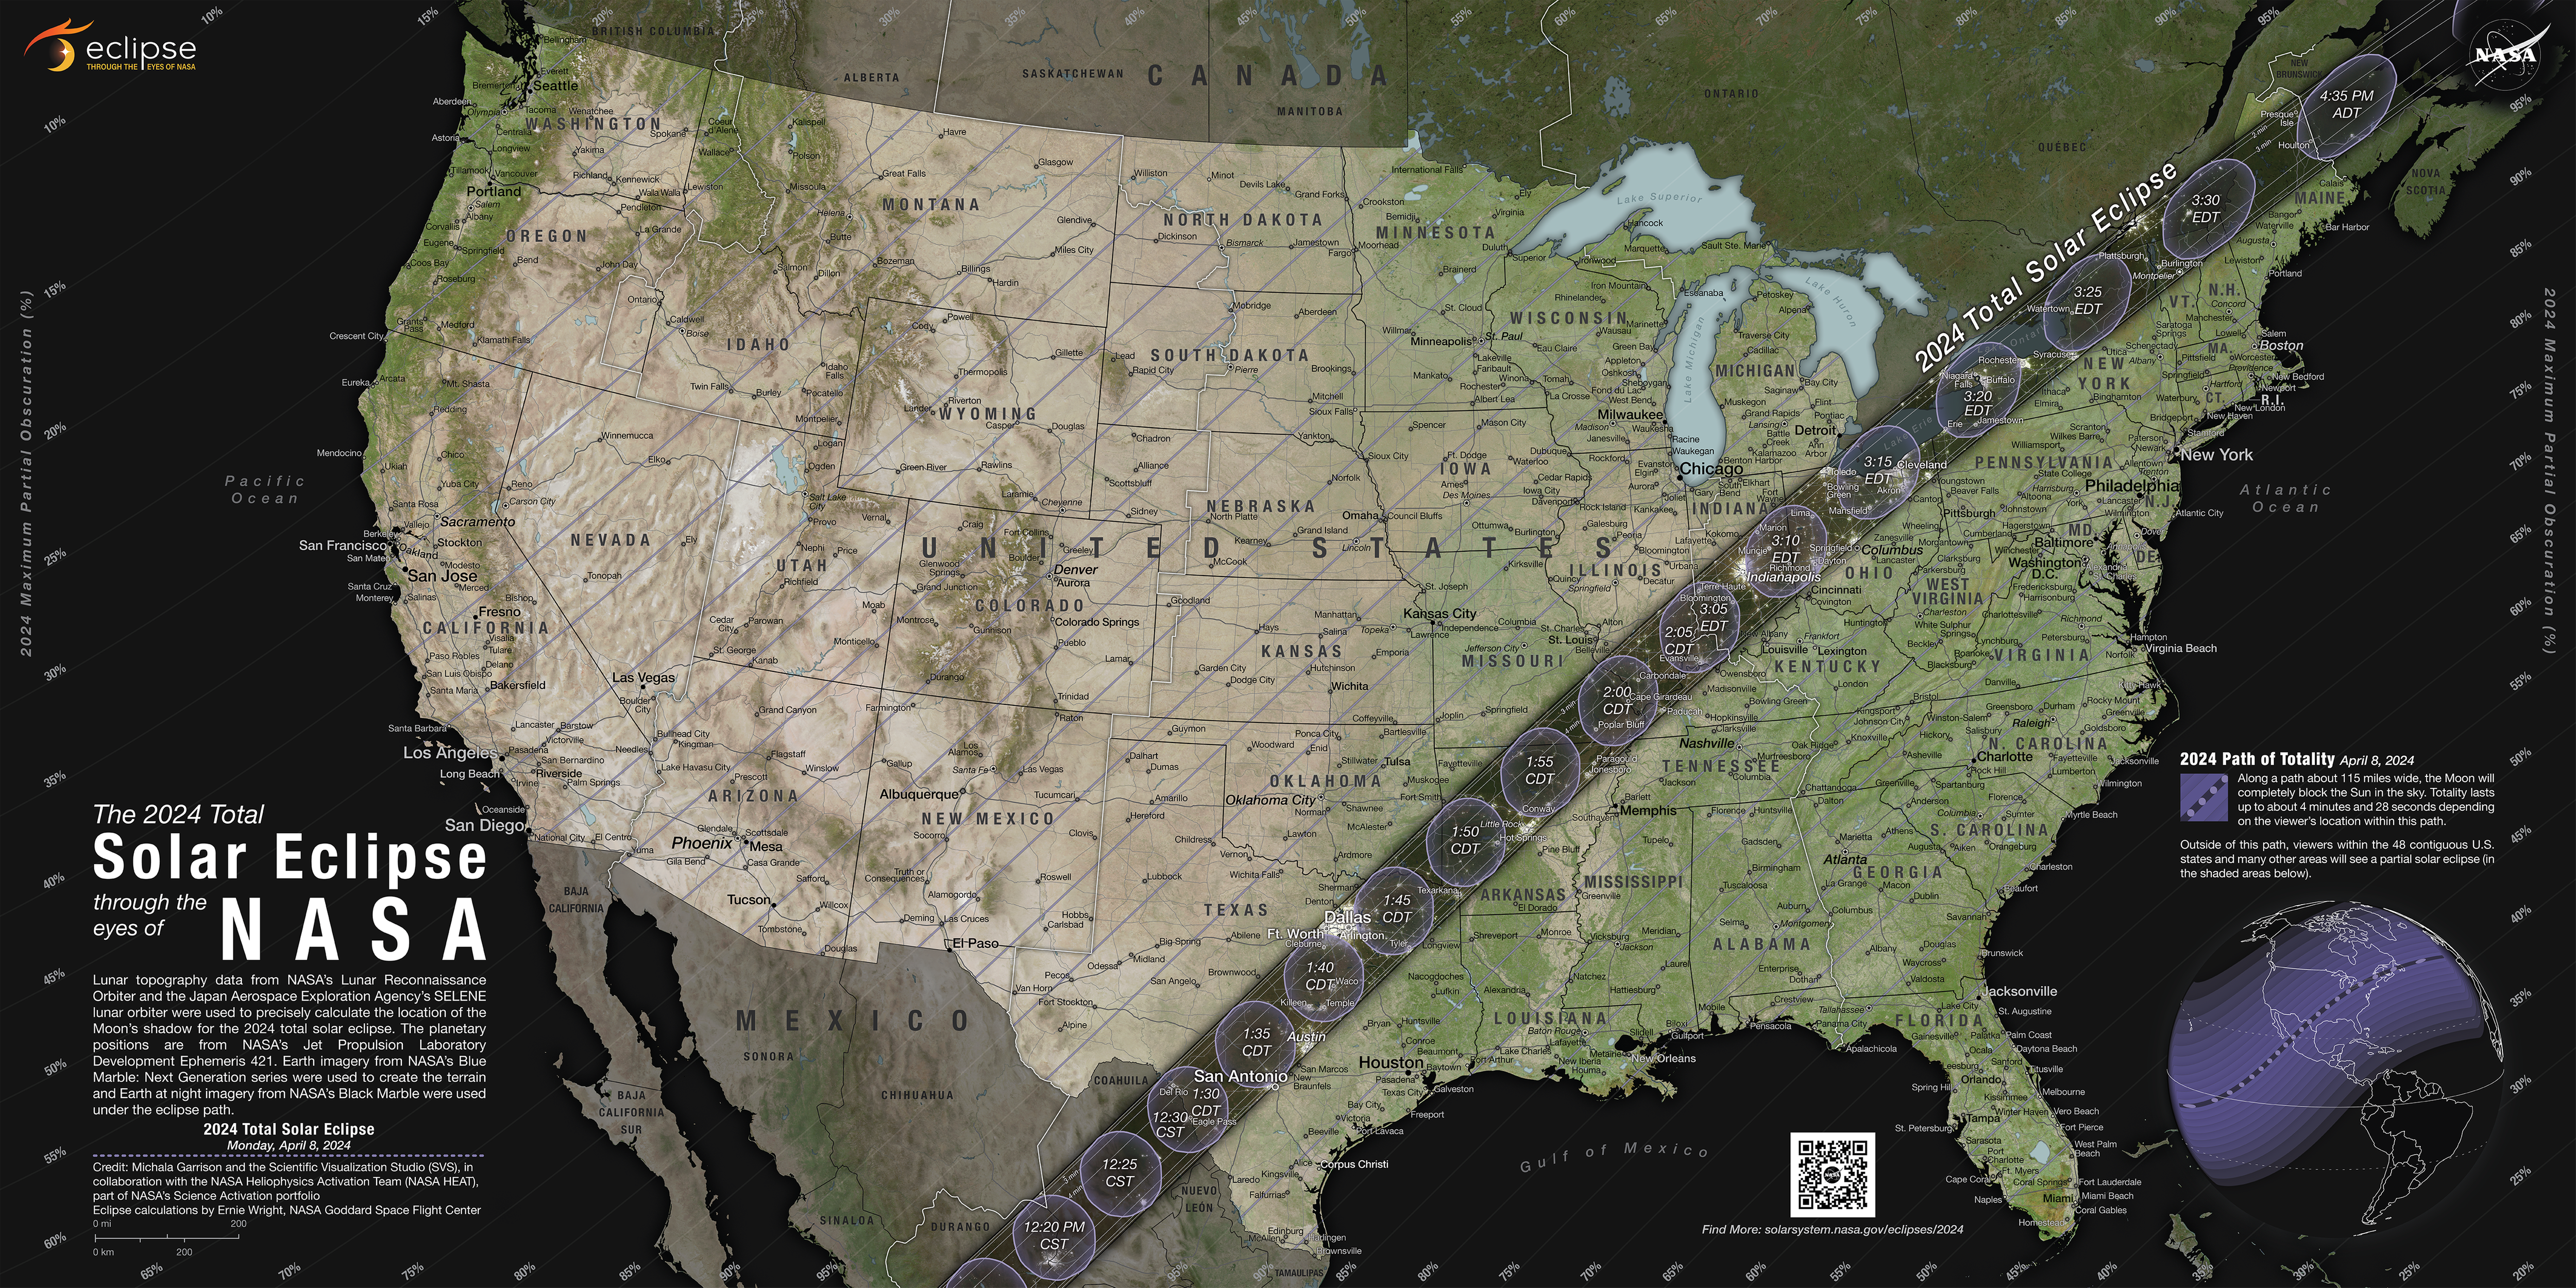 A map of the United States that shows the path of a solar eclipse